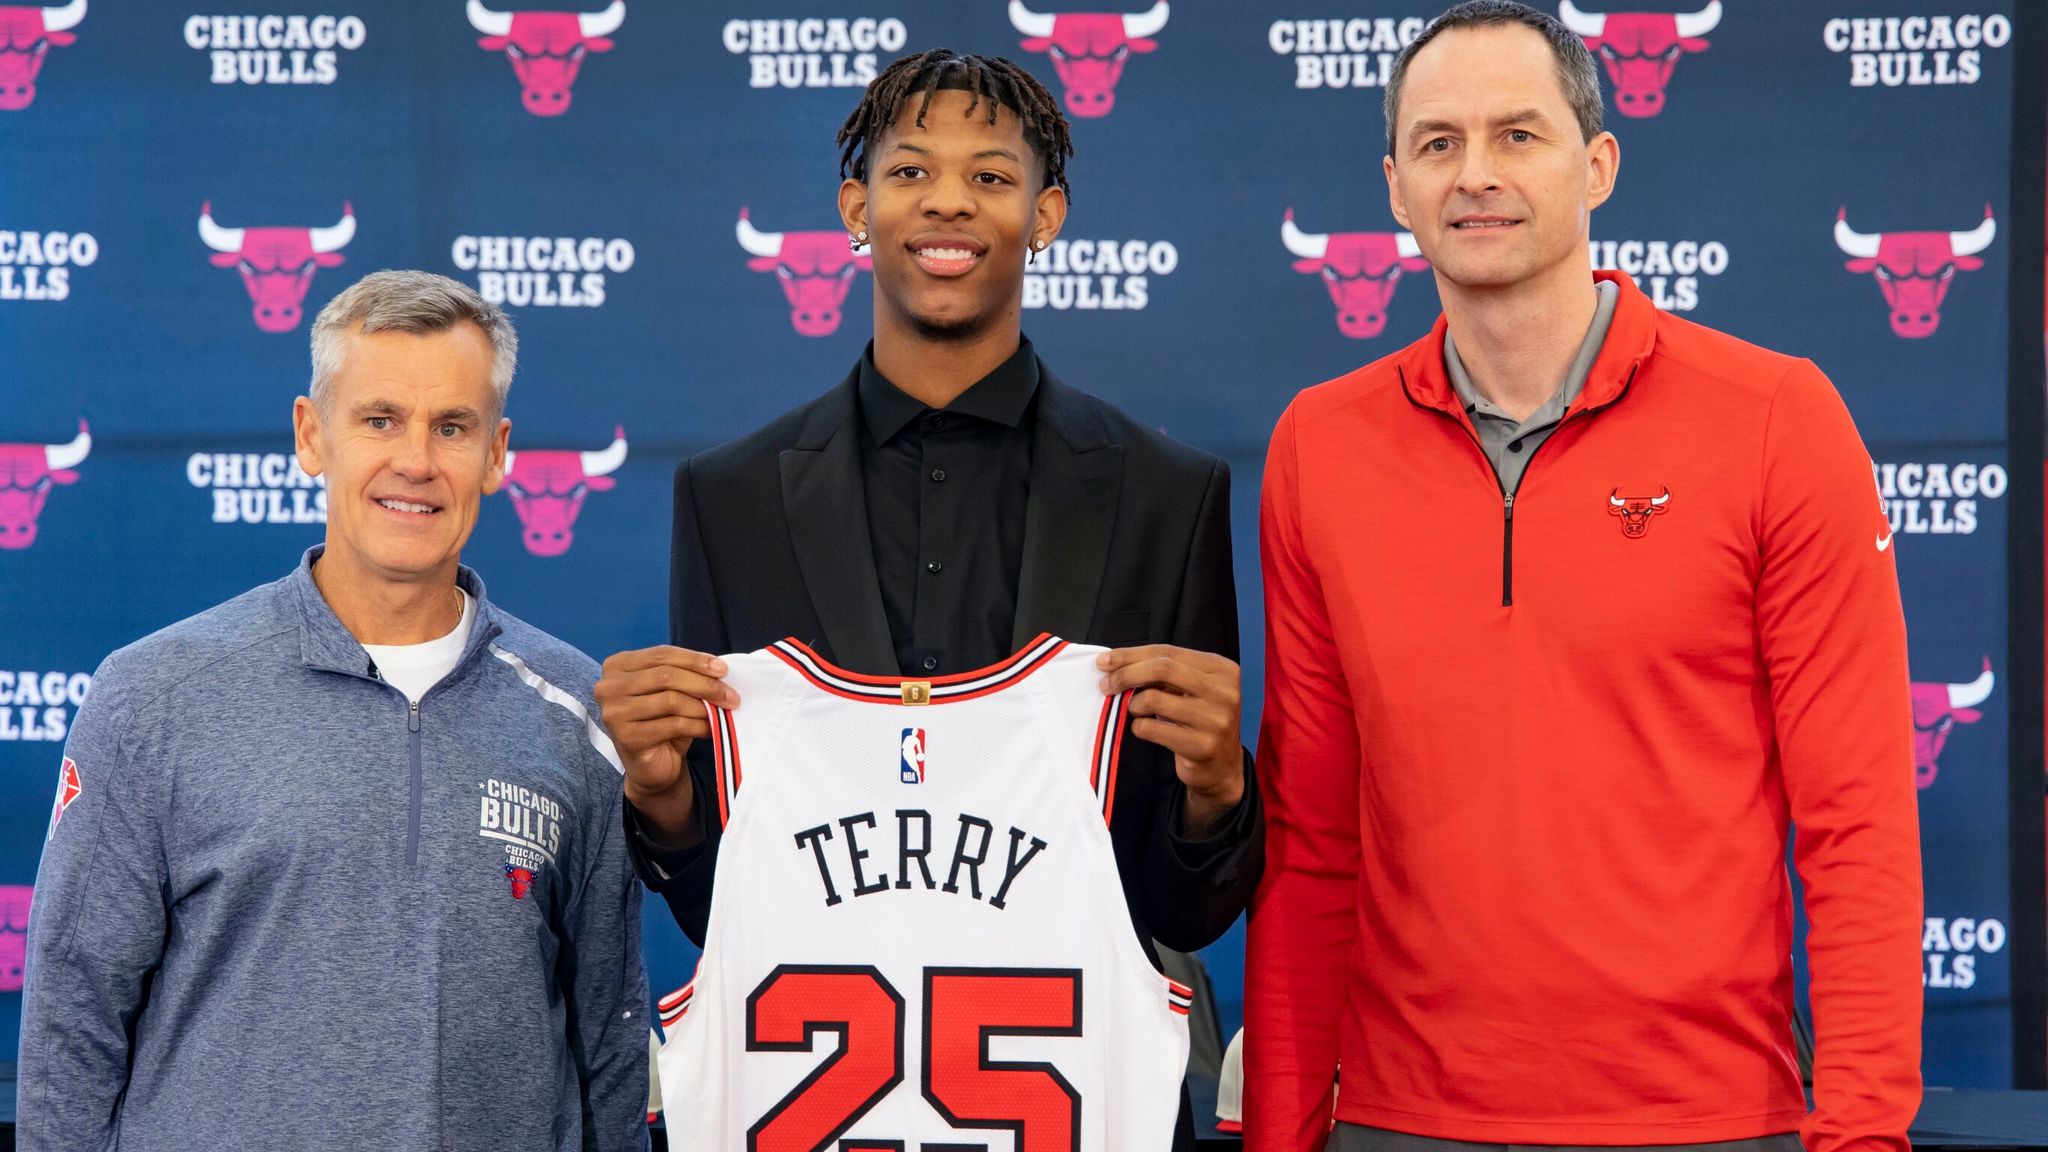 Chicago Bulls Fan perspective on the big talking points NBA News